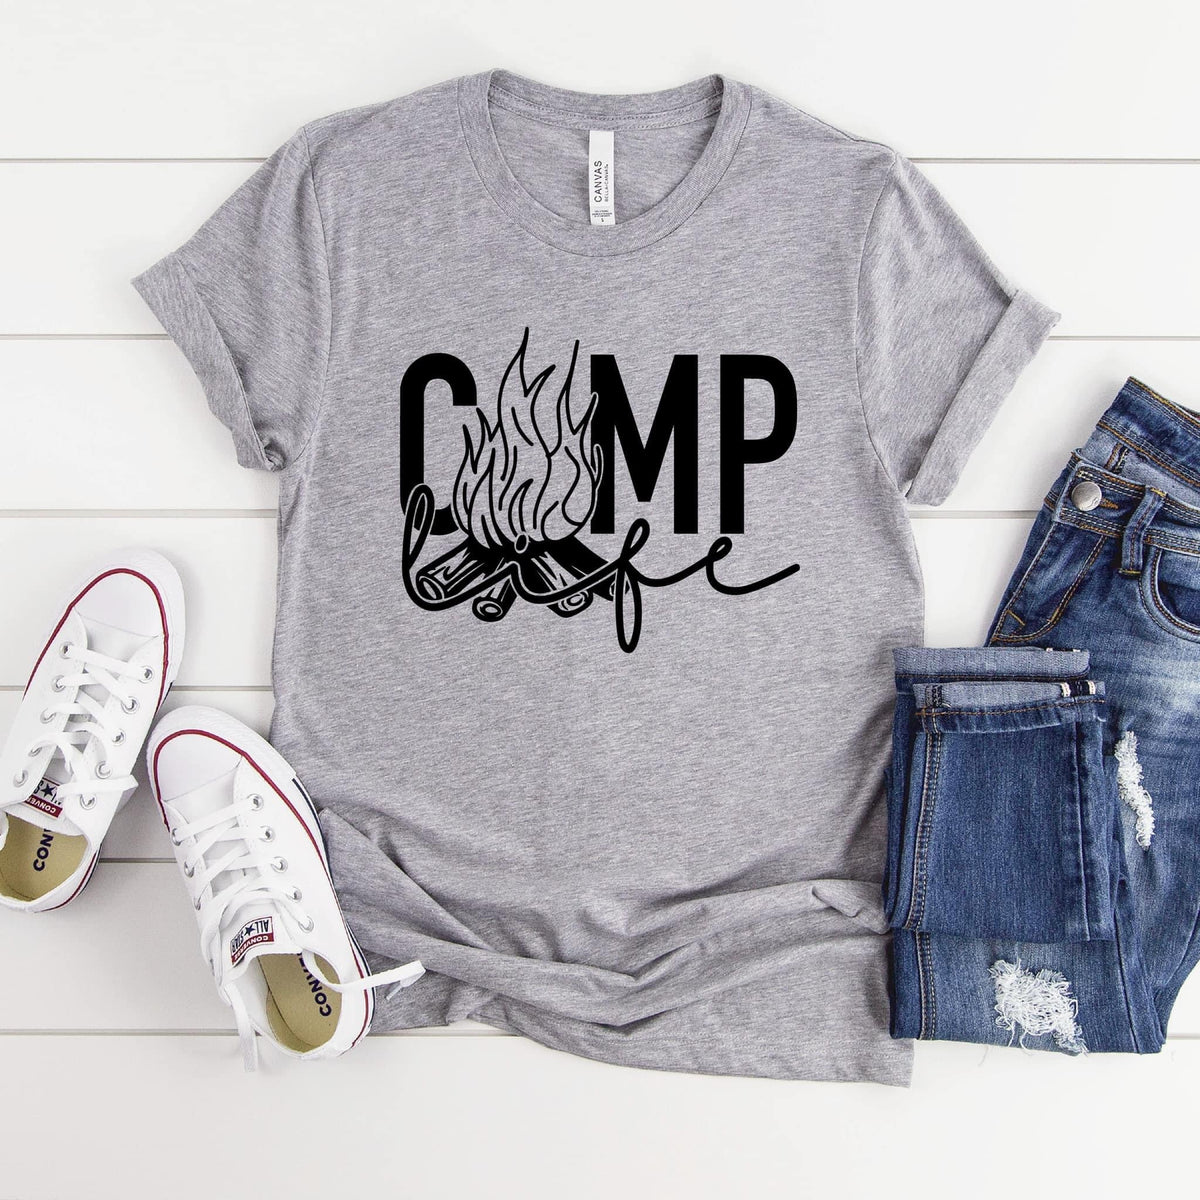 Camp life GRAPHIC TEE allow 7 days to process + shipping time